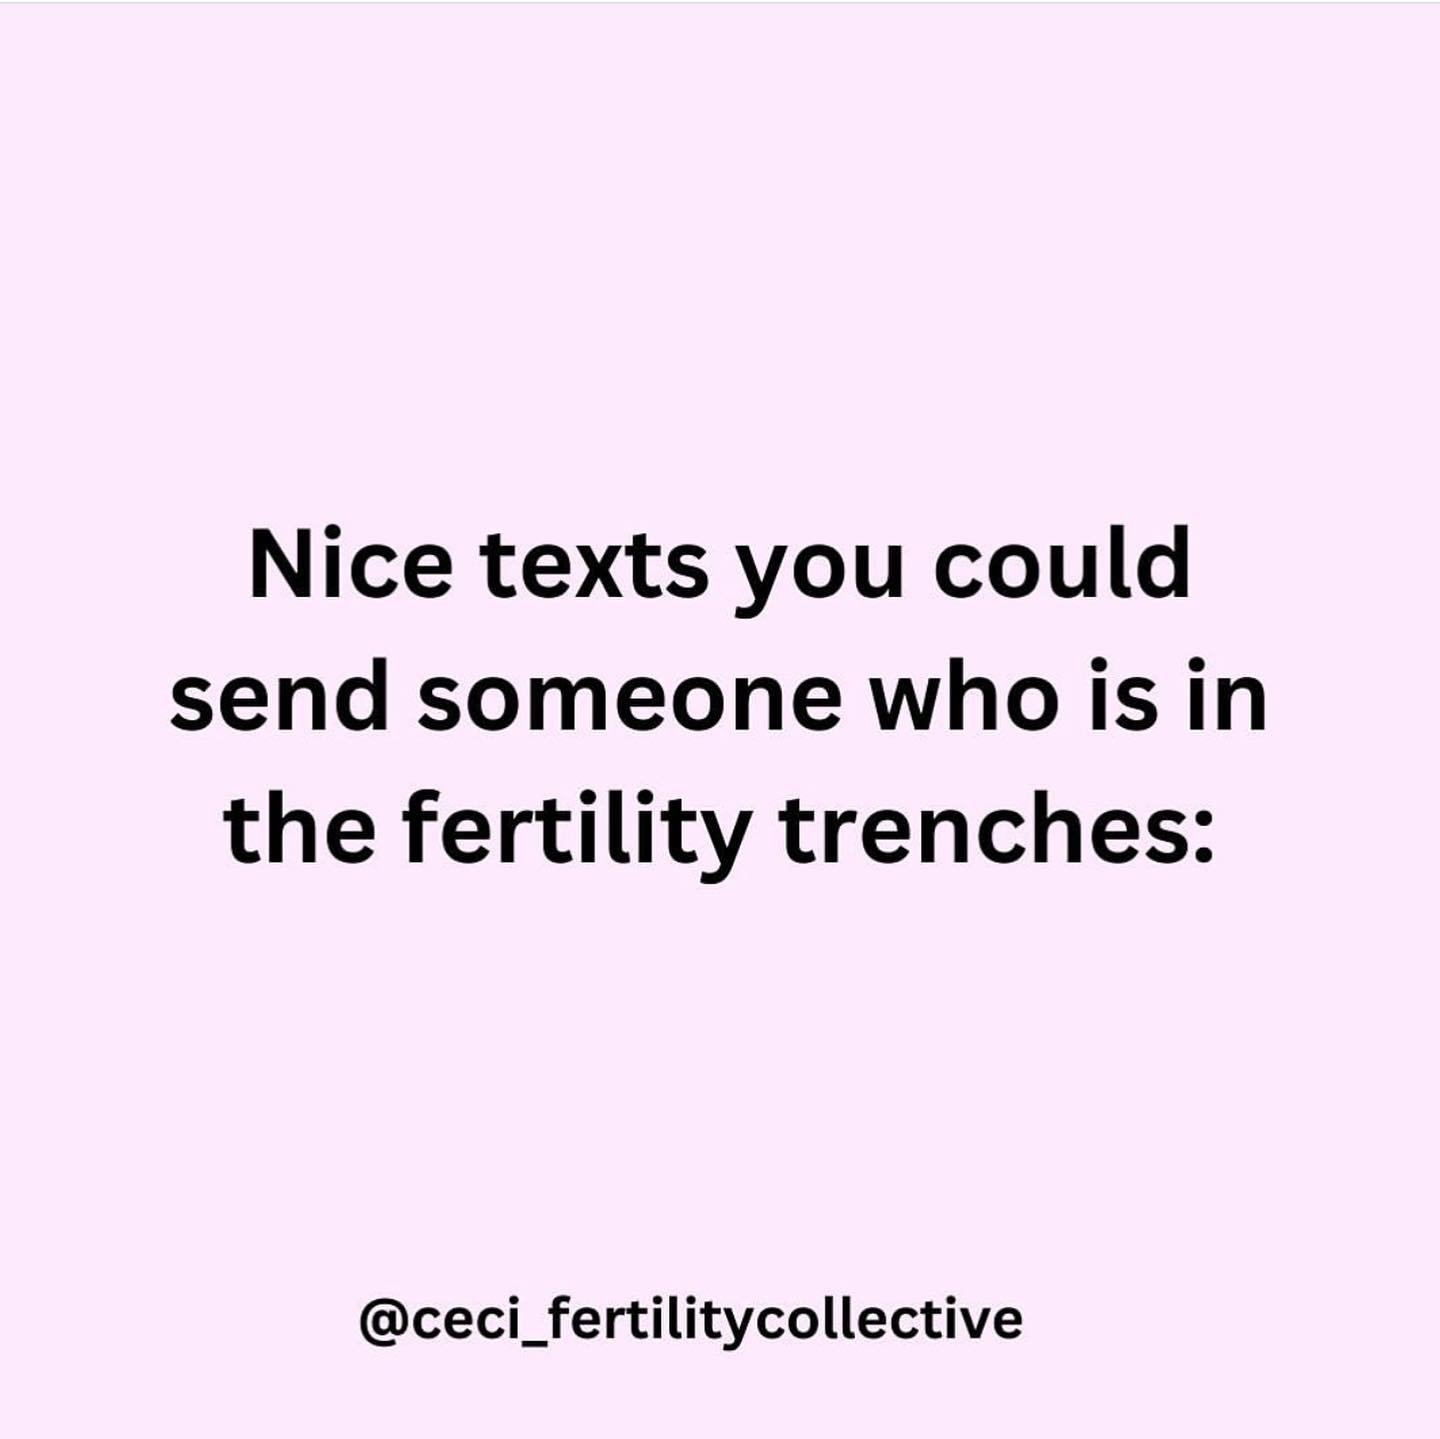 Drop a ❤️ if you would like to receive one of these messages...

Sending you my love, as always.

If you're trying to conceive, come and join Fertility Collective membership for 24/7 fertility support, wellness, experts, movement, mindset, meal plans